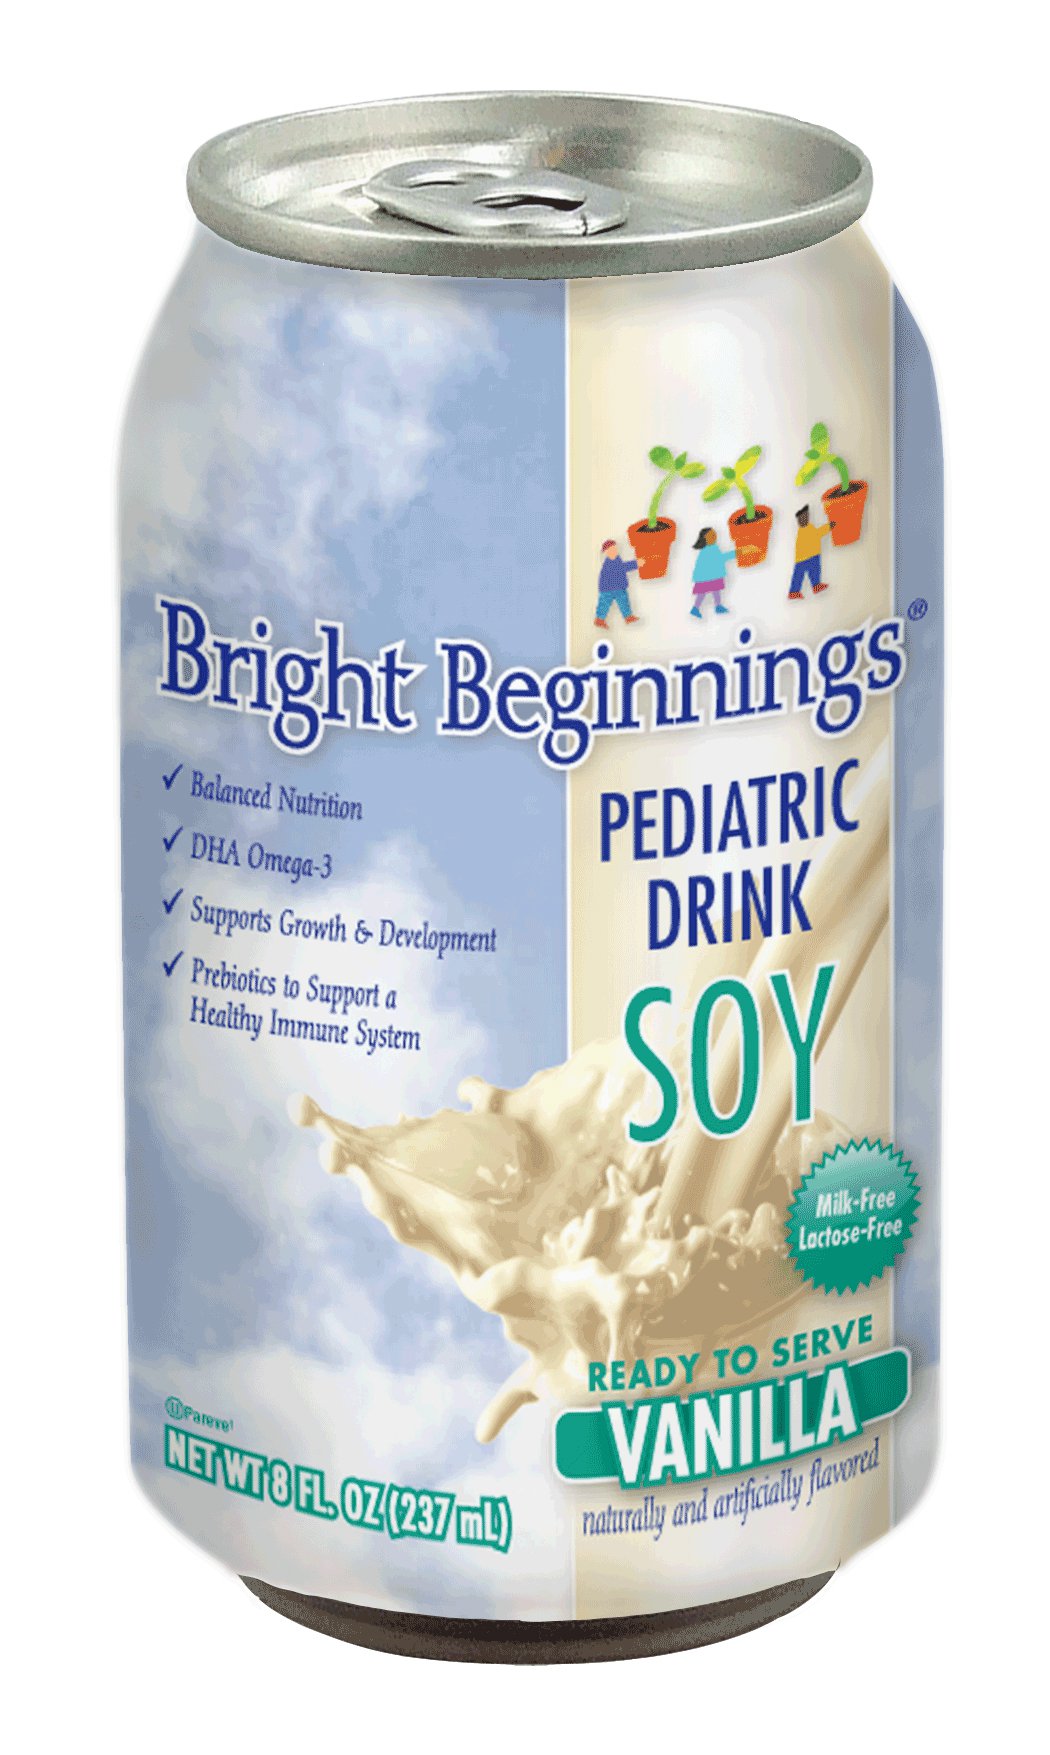 Bright Beginnings Soy Pediatric Oral Supplement, Vanilla, 8 oz. Can